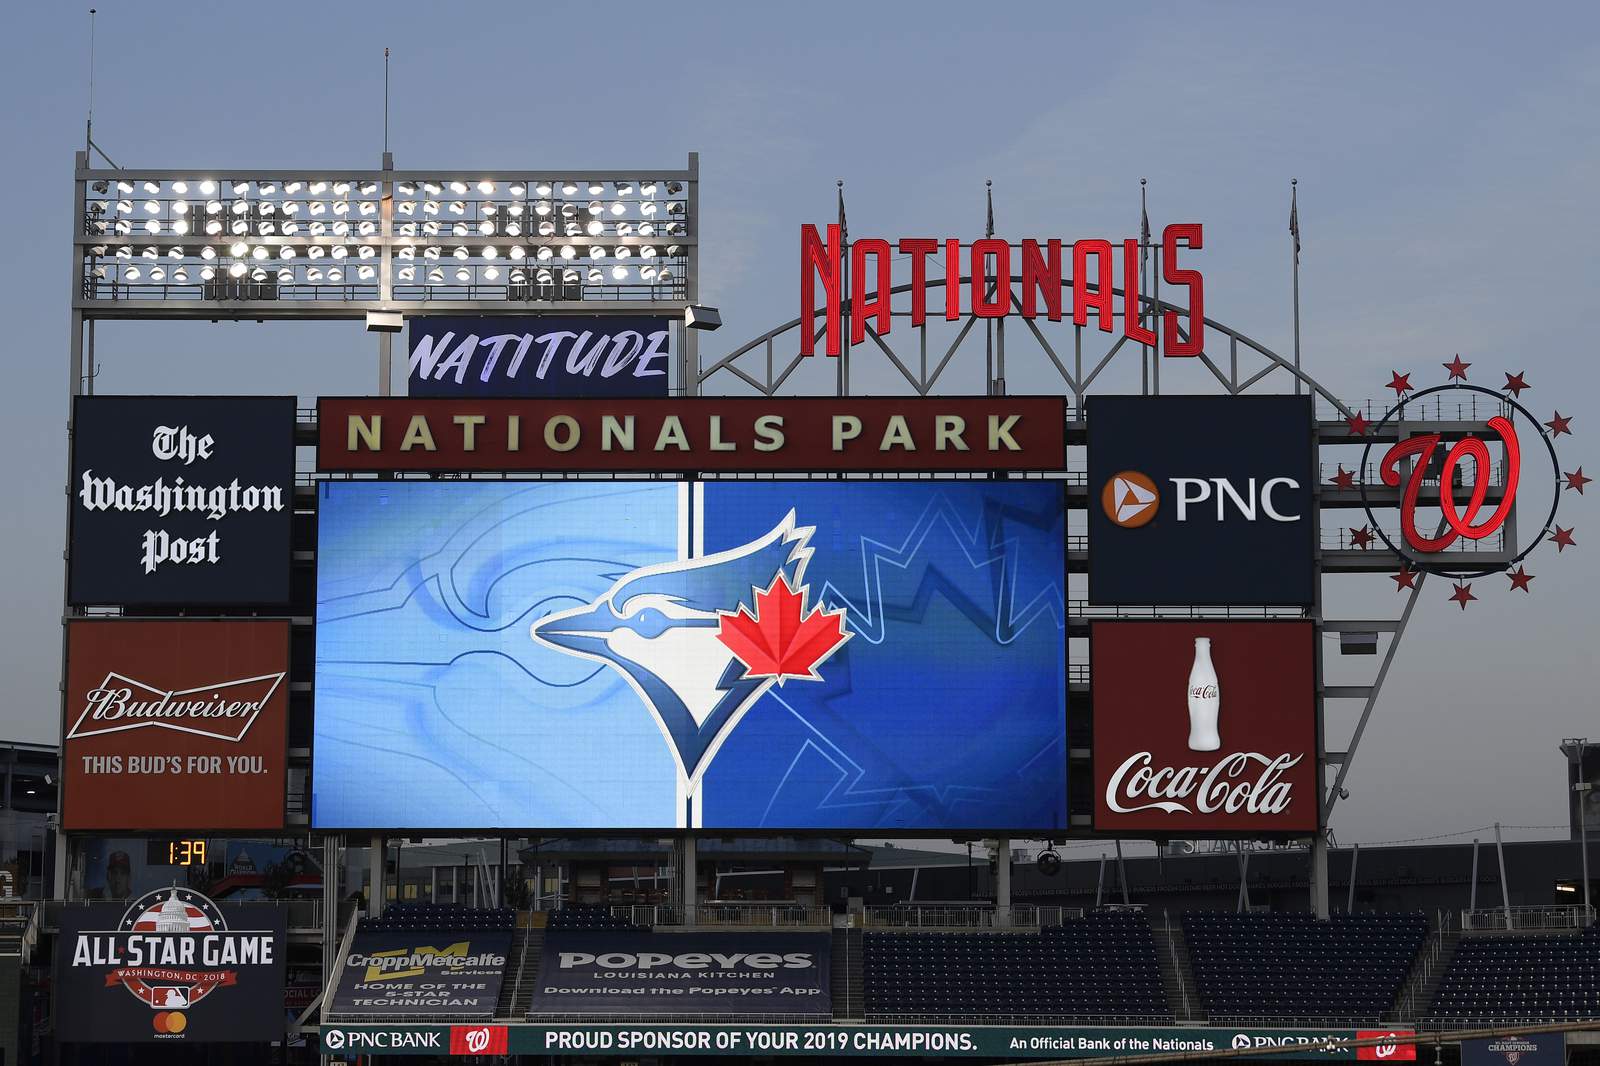 4-run 10th for Nats spoils Blue Jays' 'home opener' in DC